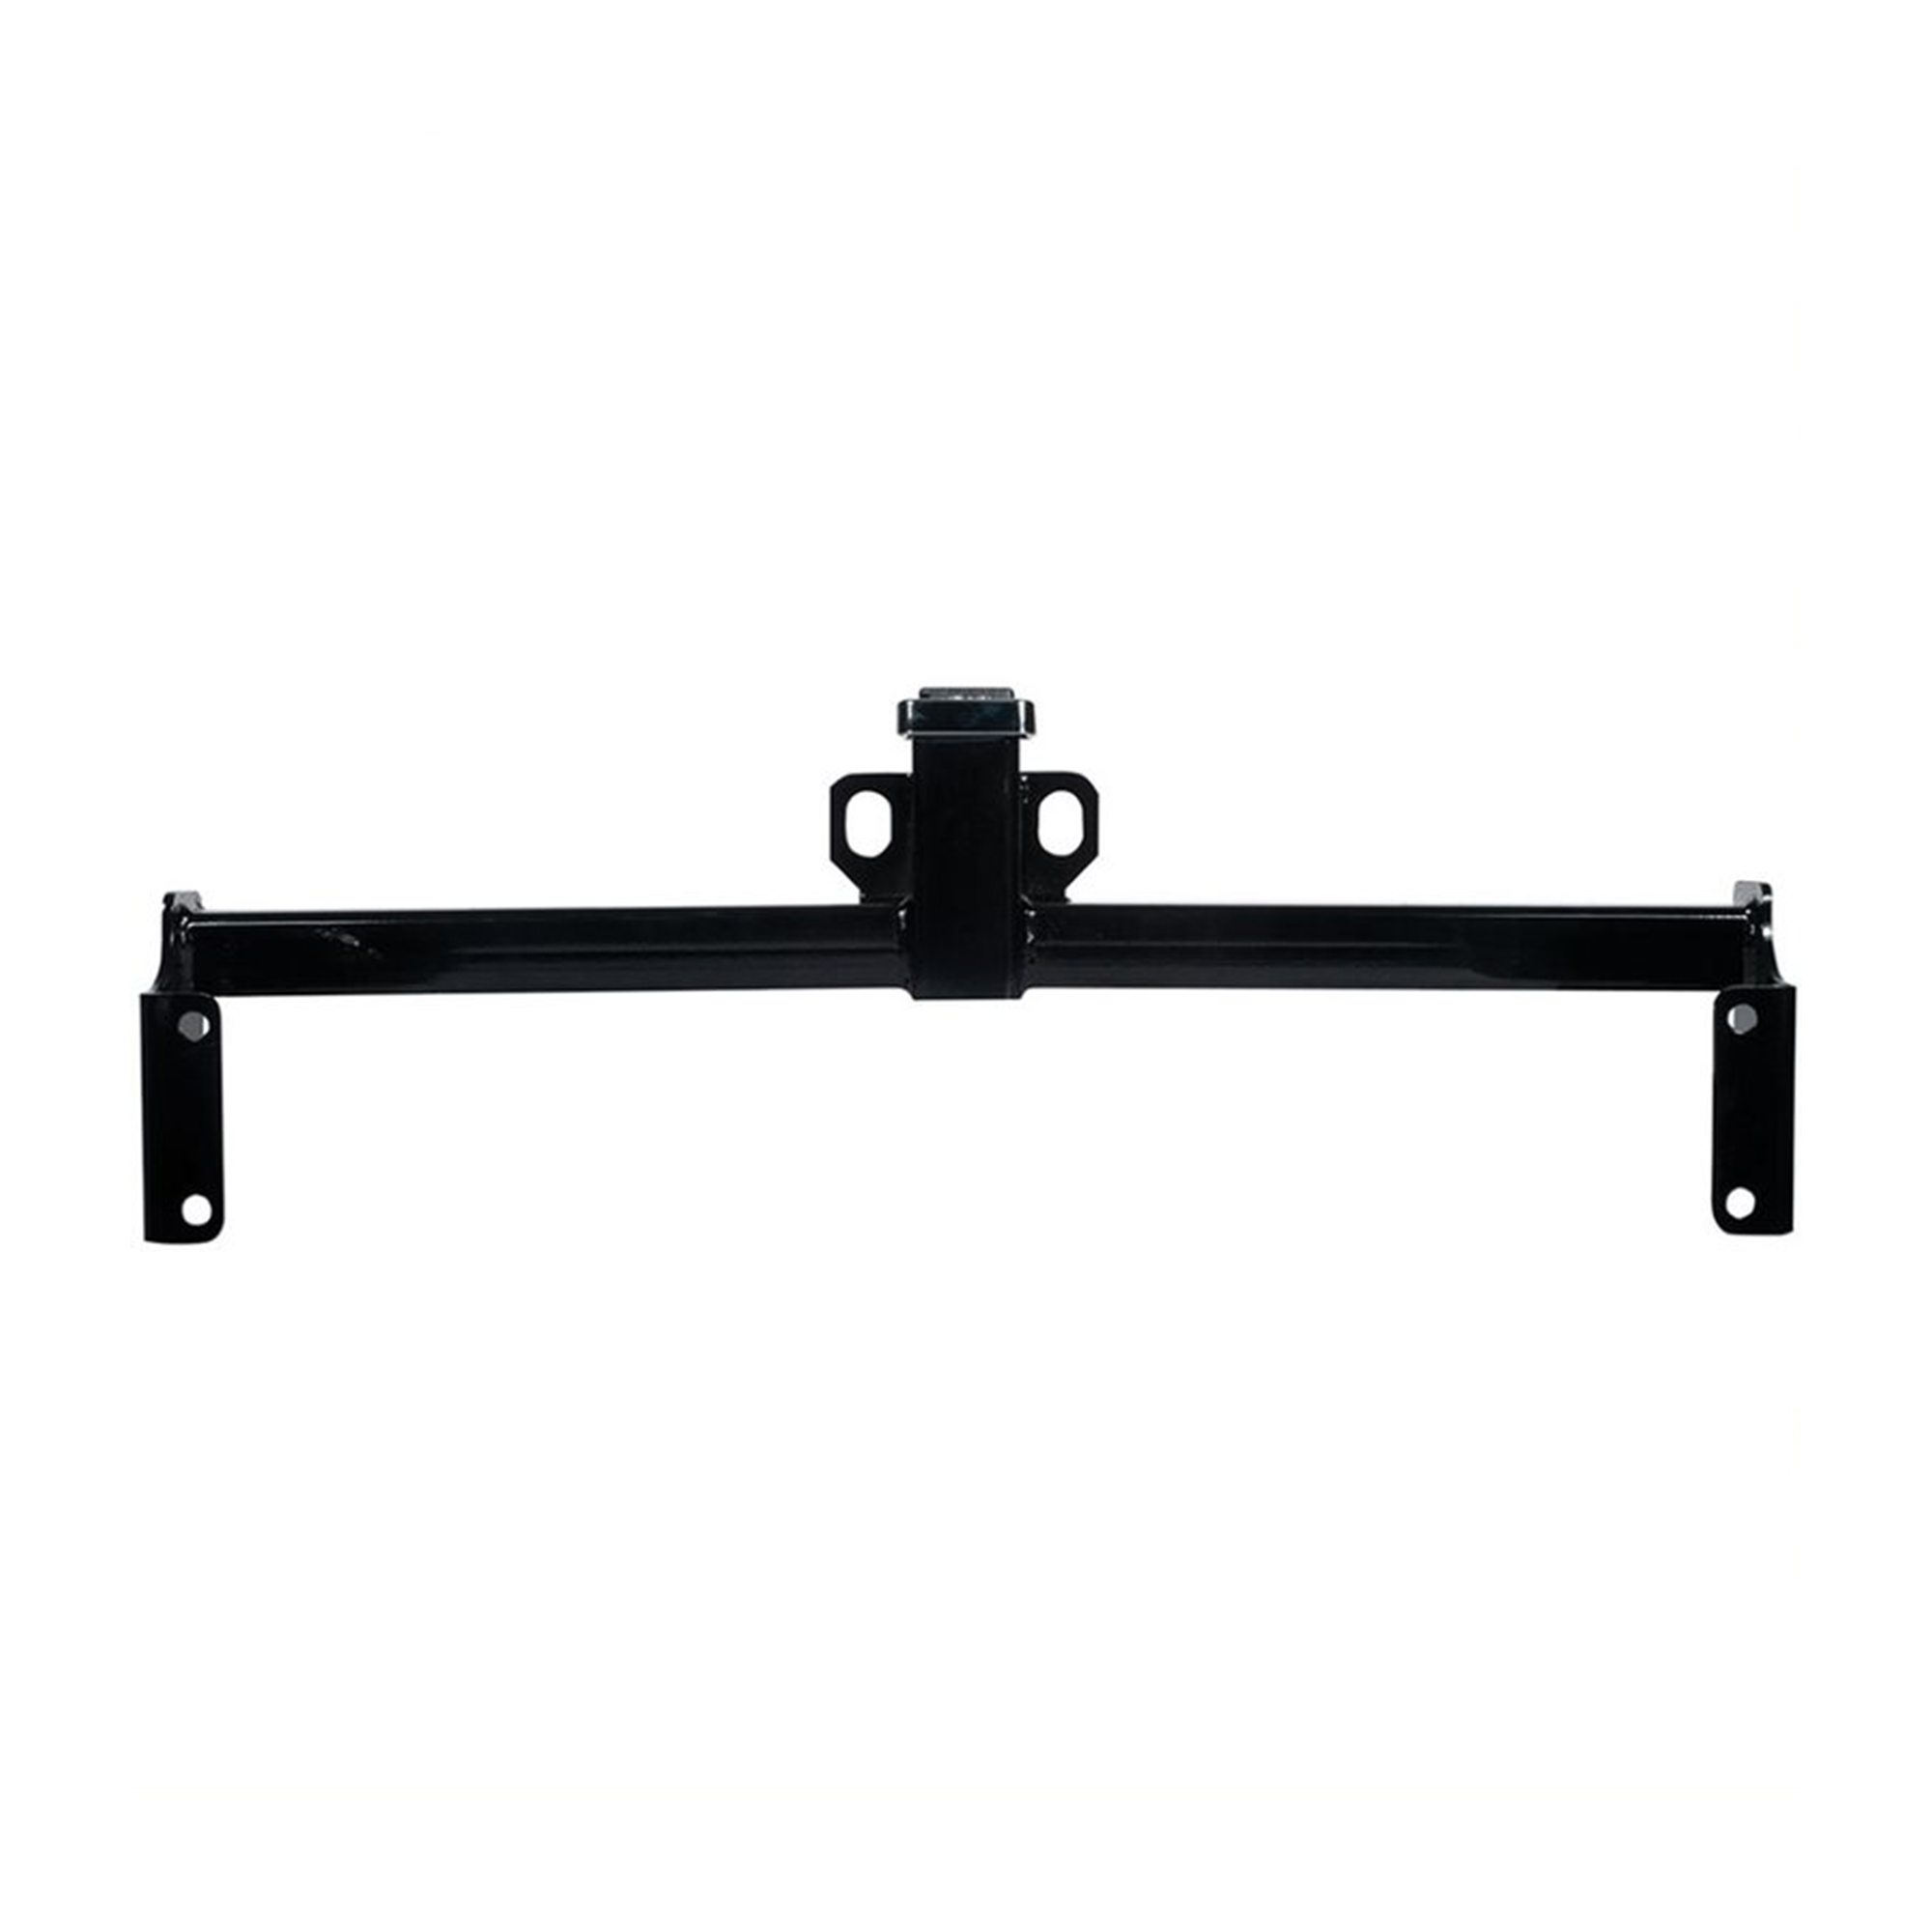 Reese Towpower Class III Max Frame Trailer Tow Hitch w/ 2 In Receiver Tube - image 5 of 9